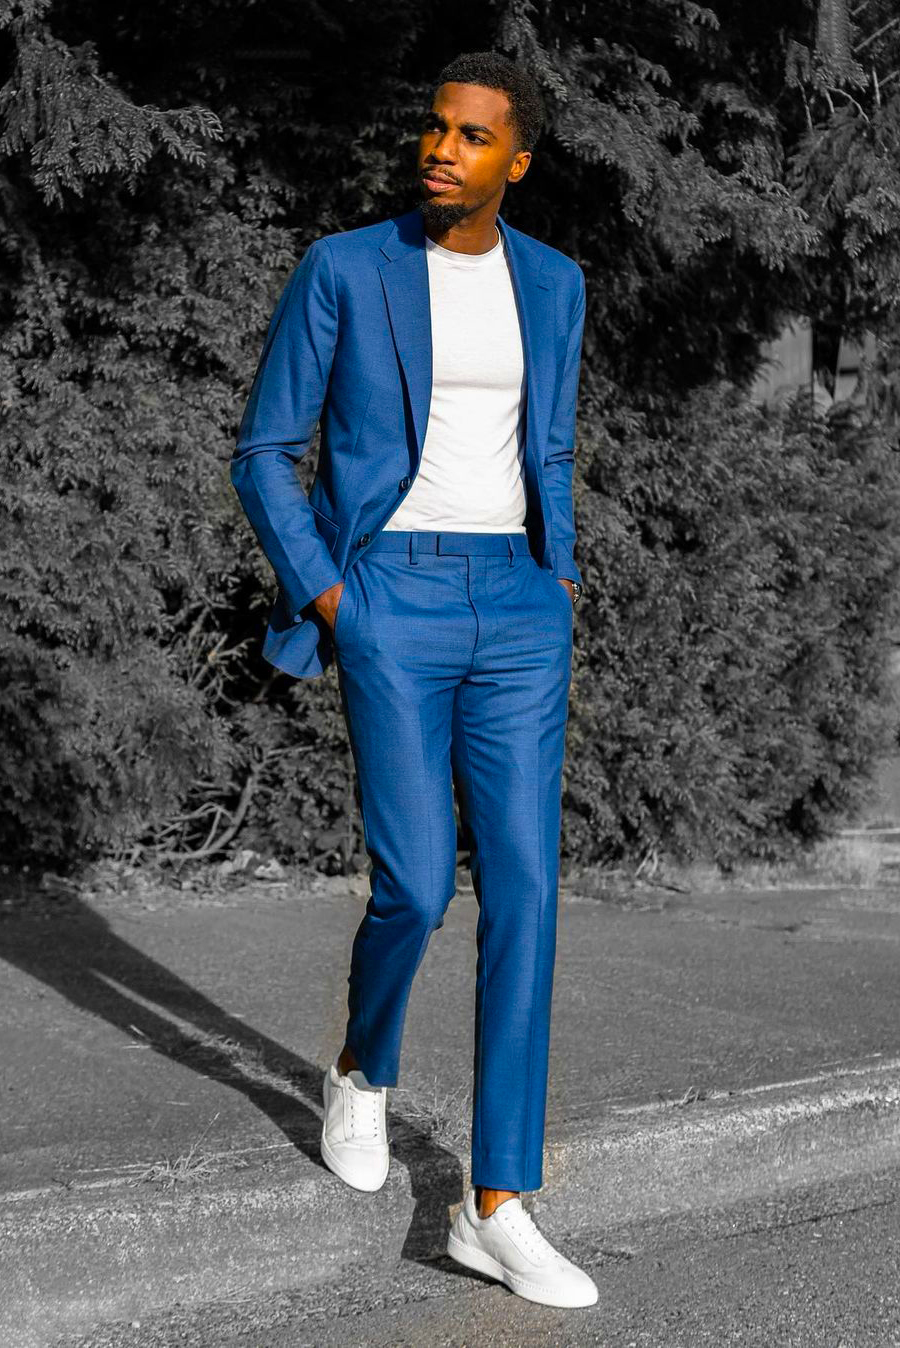 Blue suit, white crew neck t-shirt, and white low-top sneakers outfit